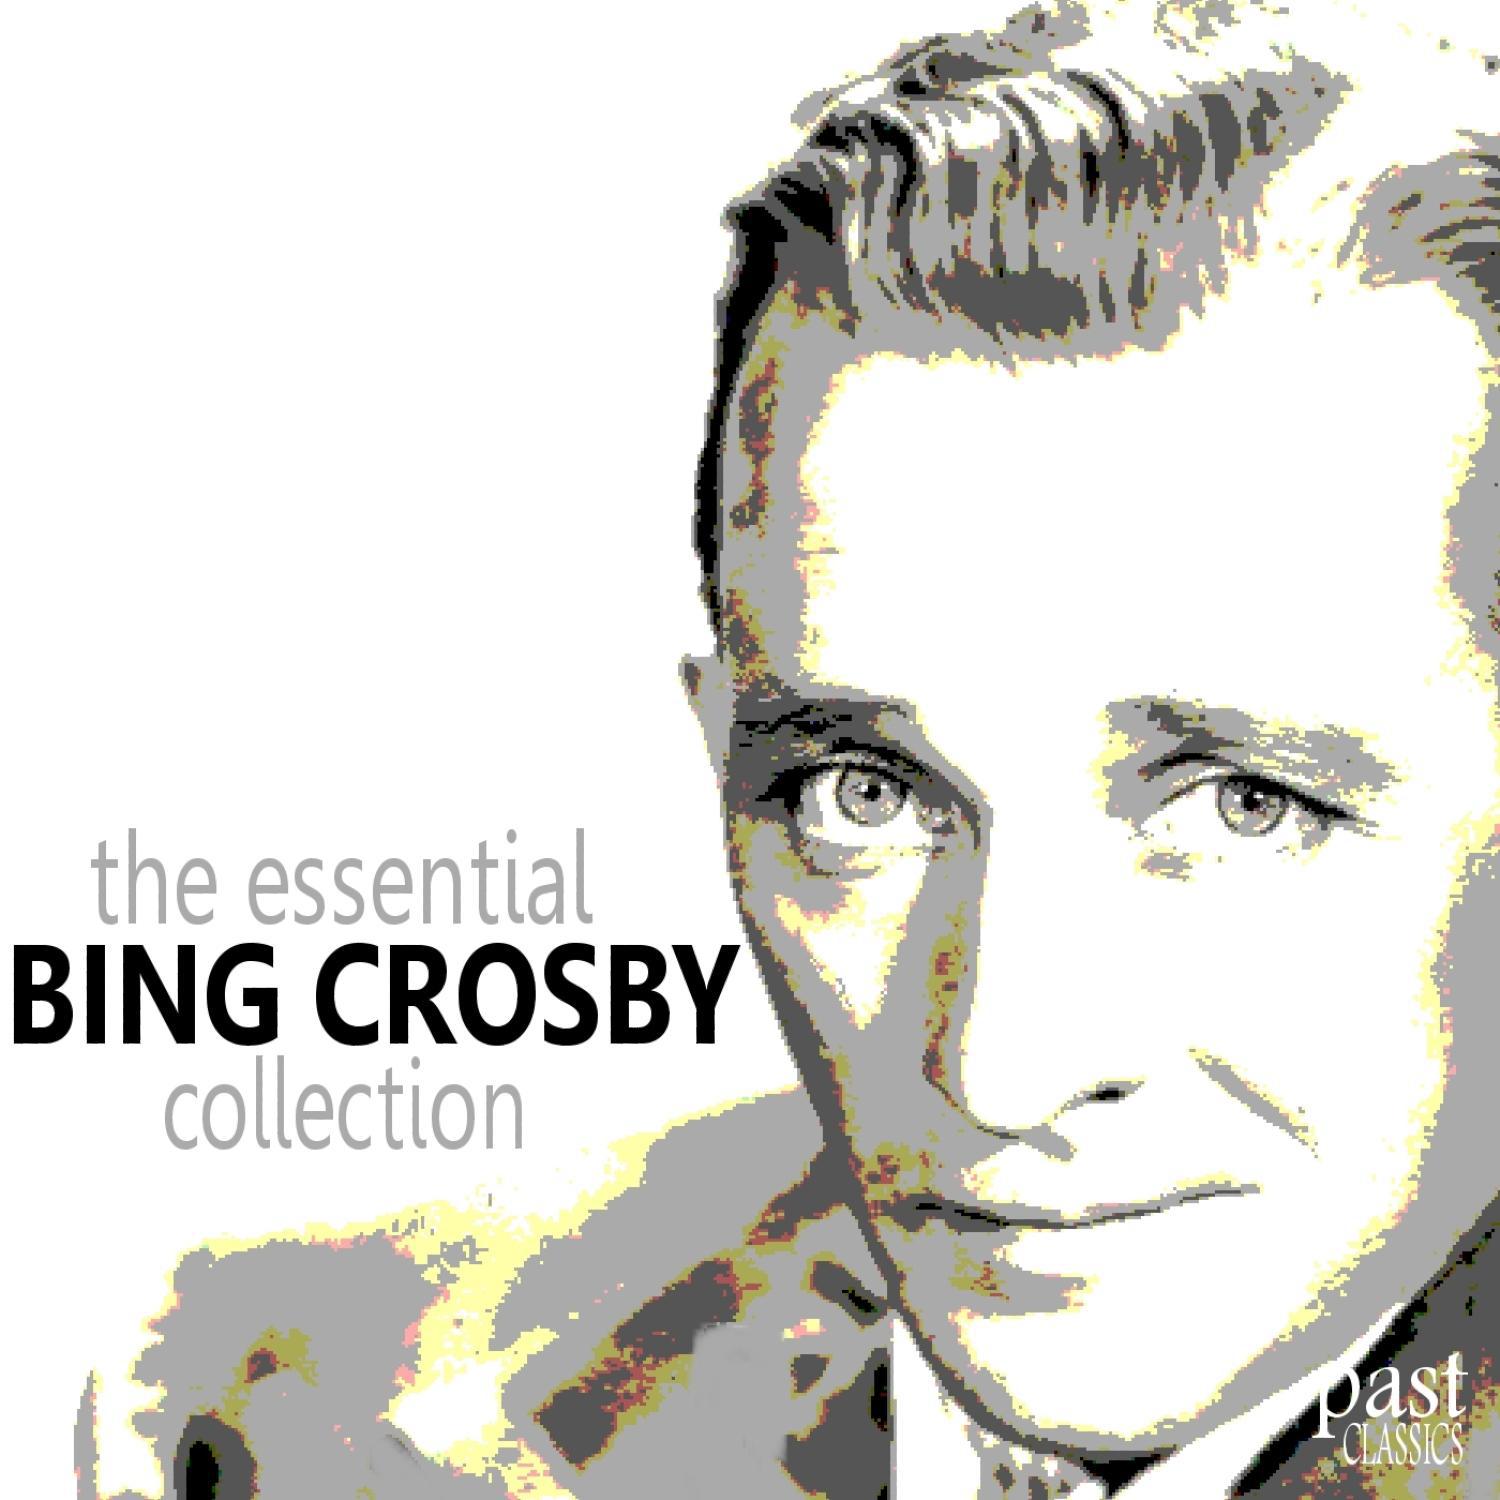 The Essential Bing Crosby Collection